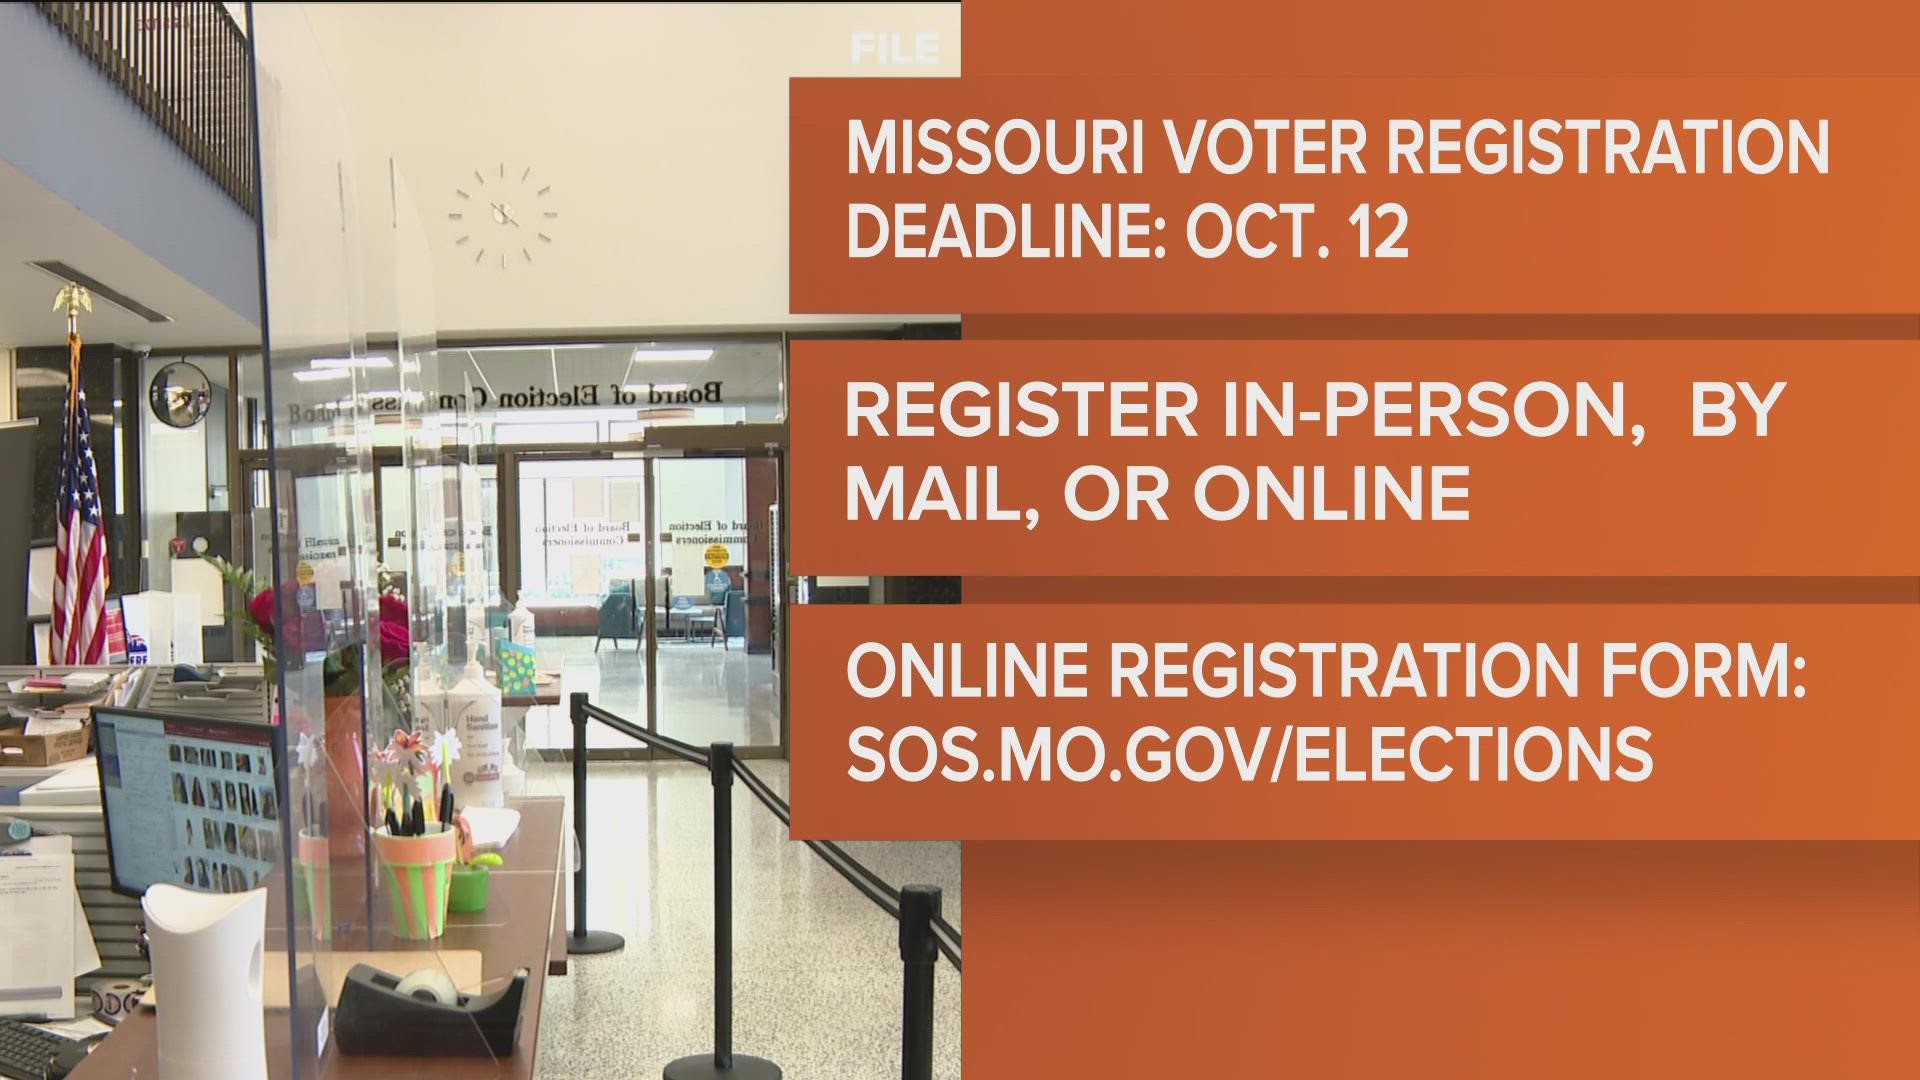 Election Day is less than a month away. Here are important deadlines to know if you plan to vote in Missouri or Illinois.